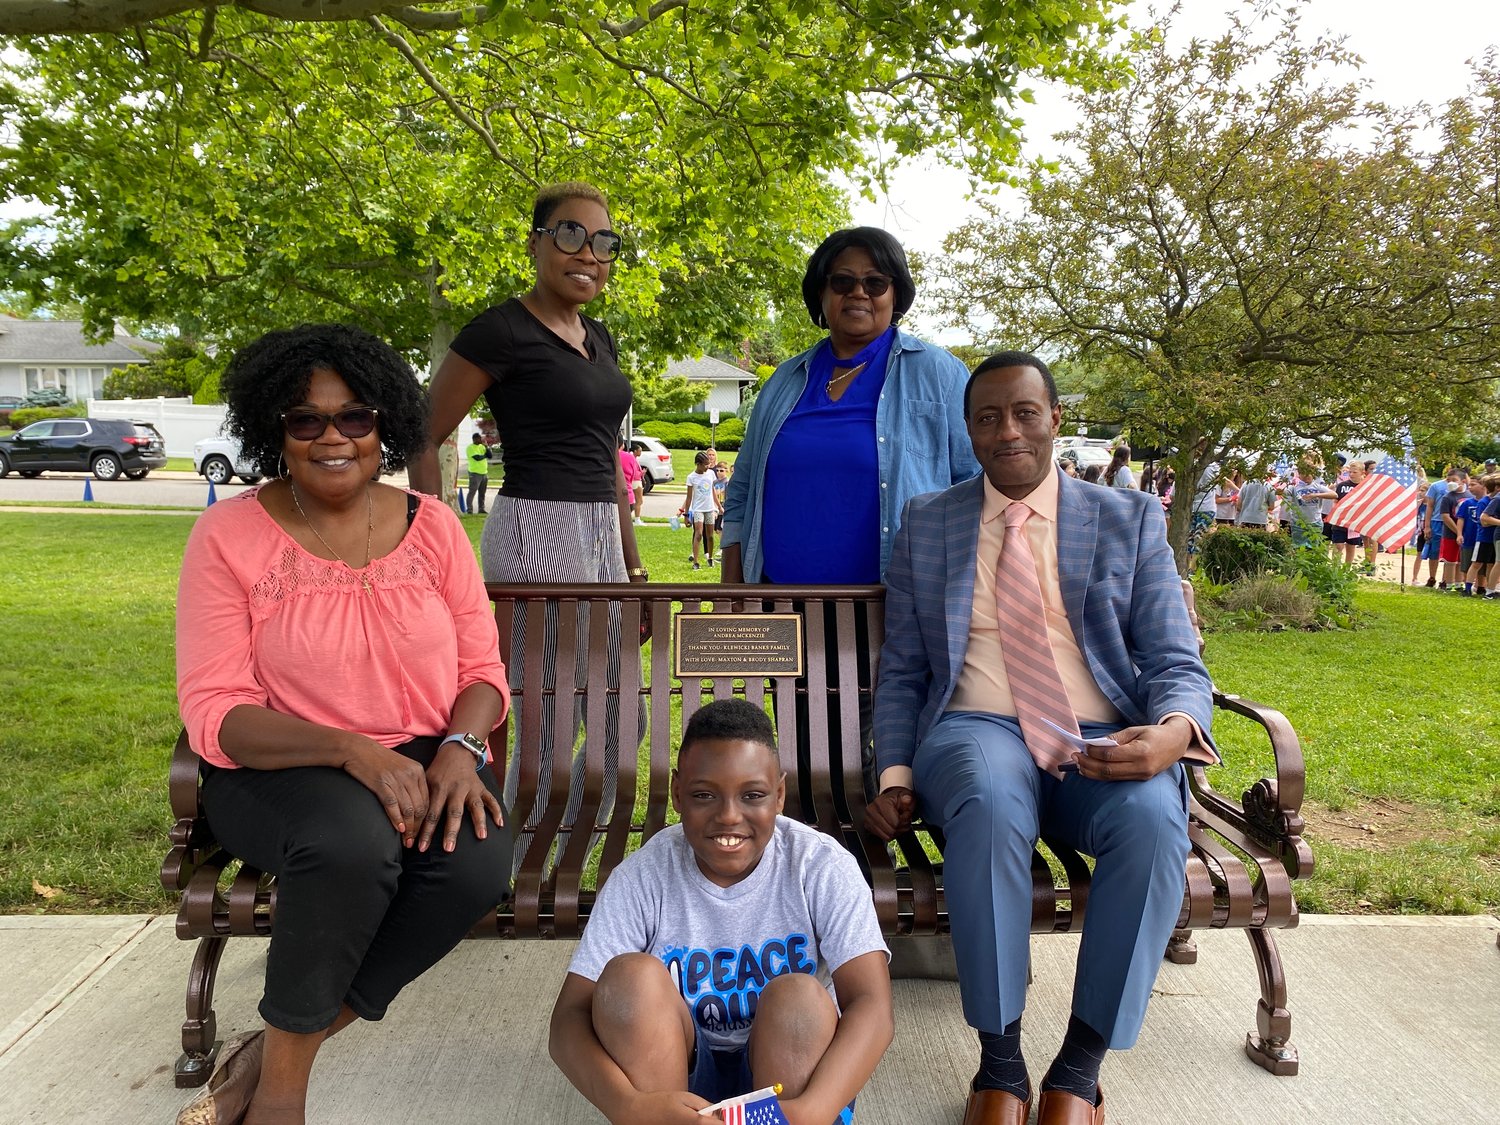 From left, Pansy Matthews, Simone Tibbetts, Jonathan McKenzie, Jennifer McLaughlin, and Stanley McKenzie surrounded the bench dedicated to their beloved family member, Andrea McKenzie.